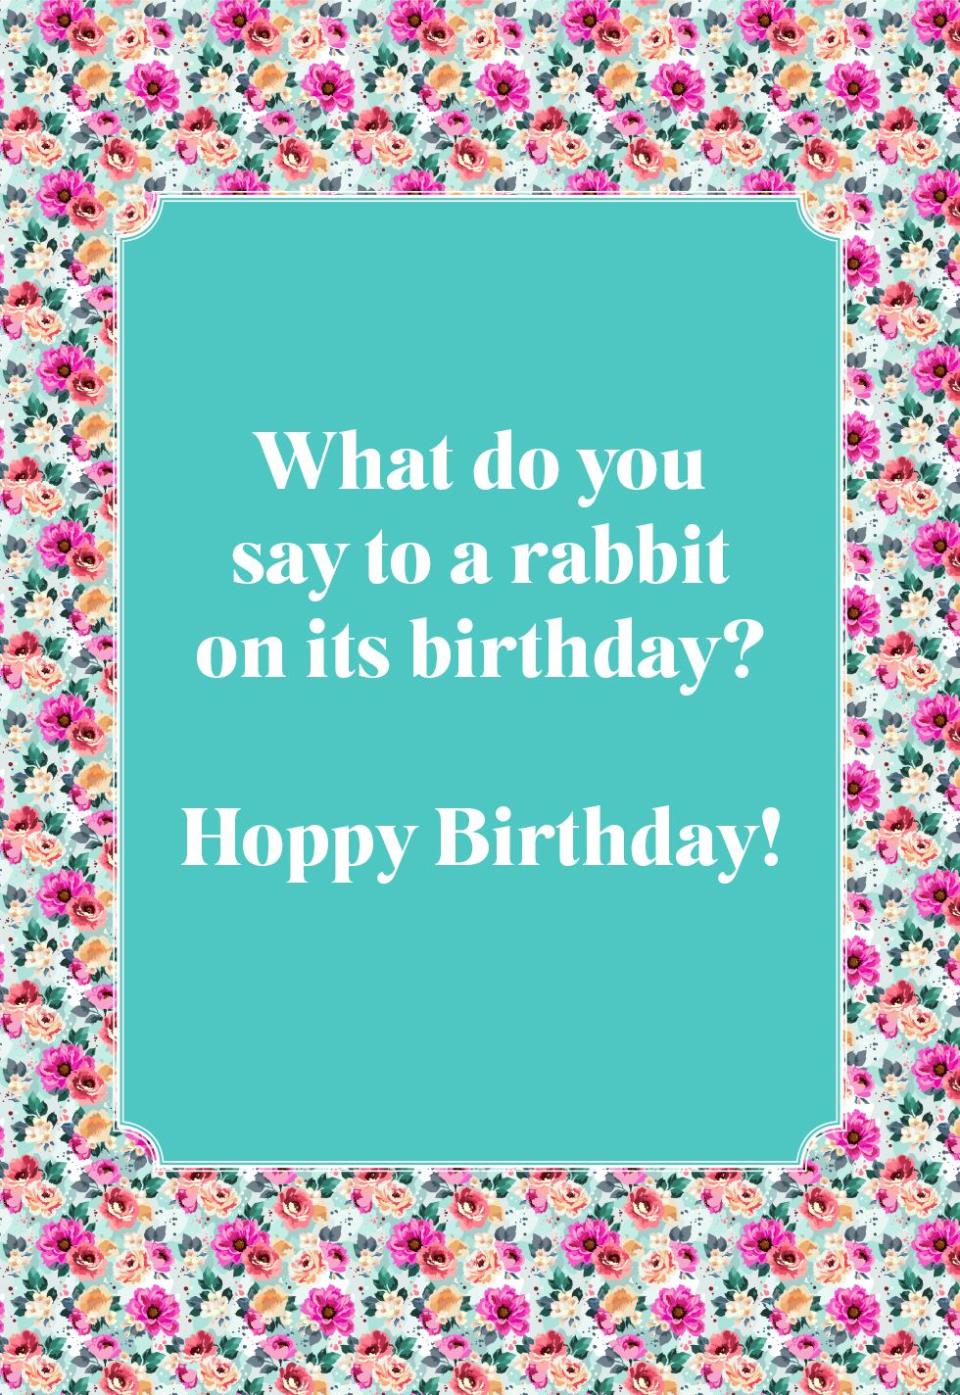 What do you say to a rabbit on its birthday?